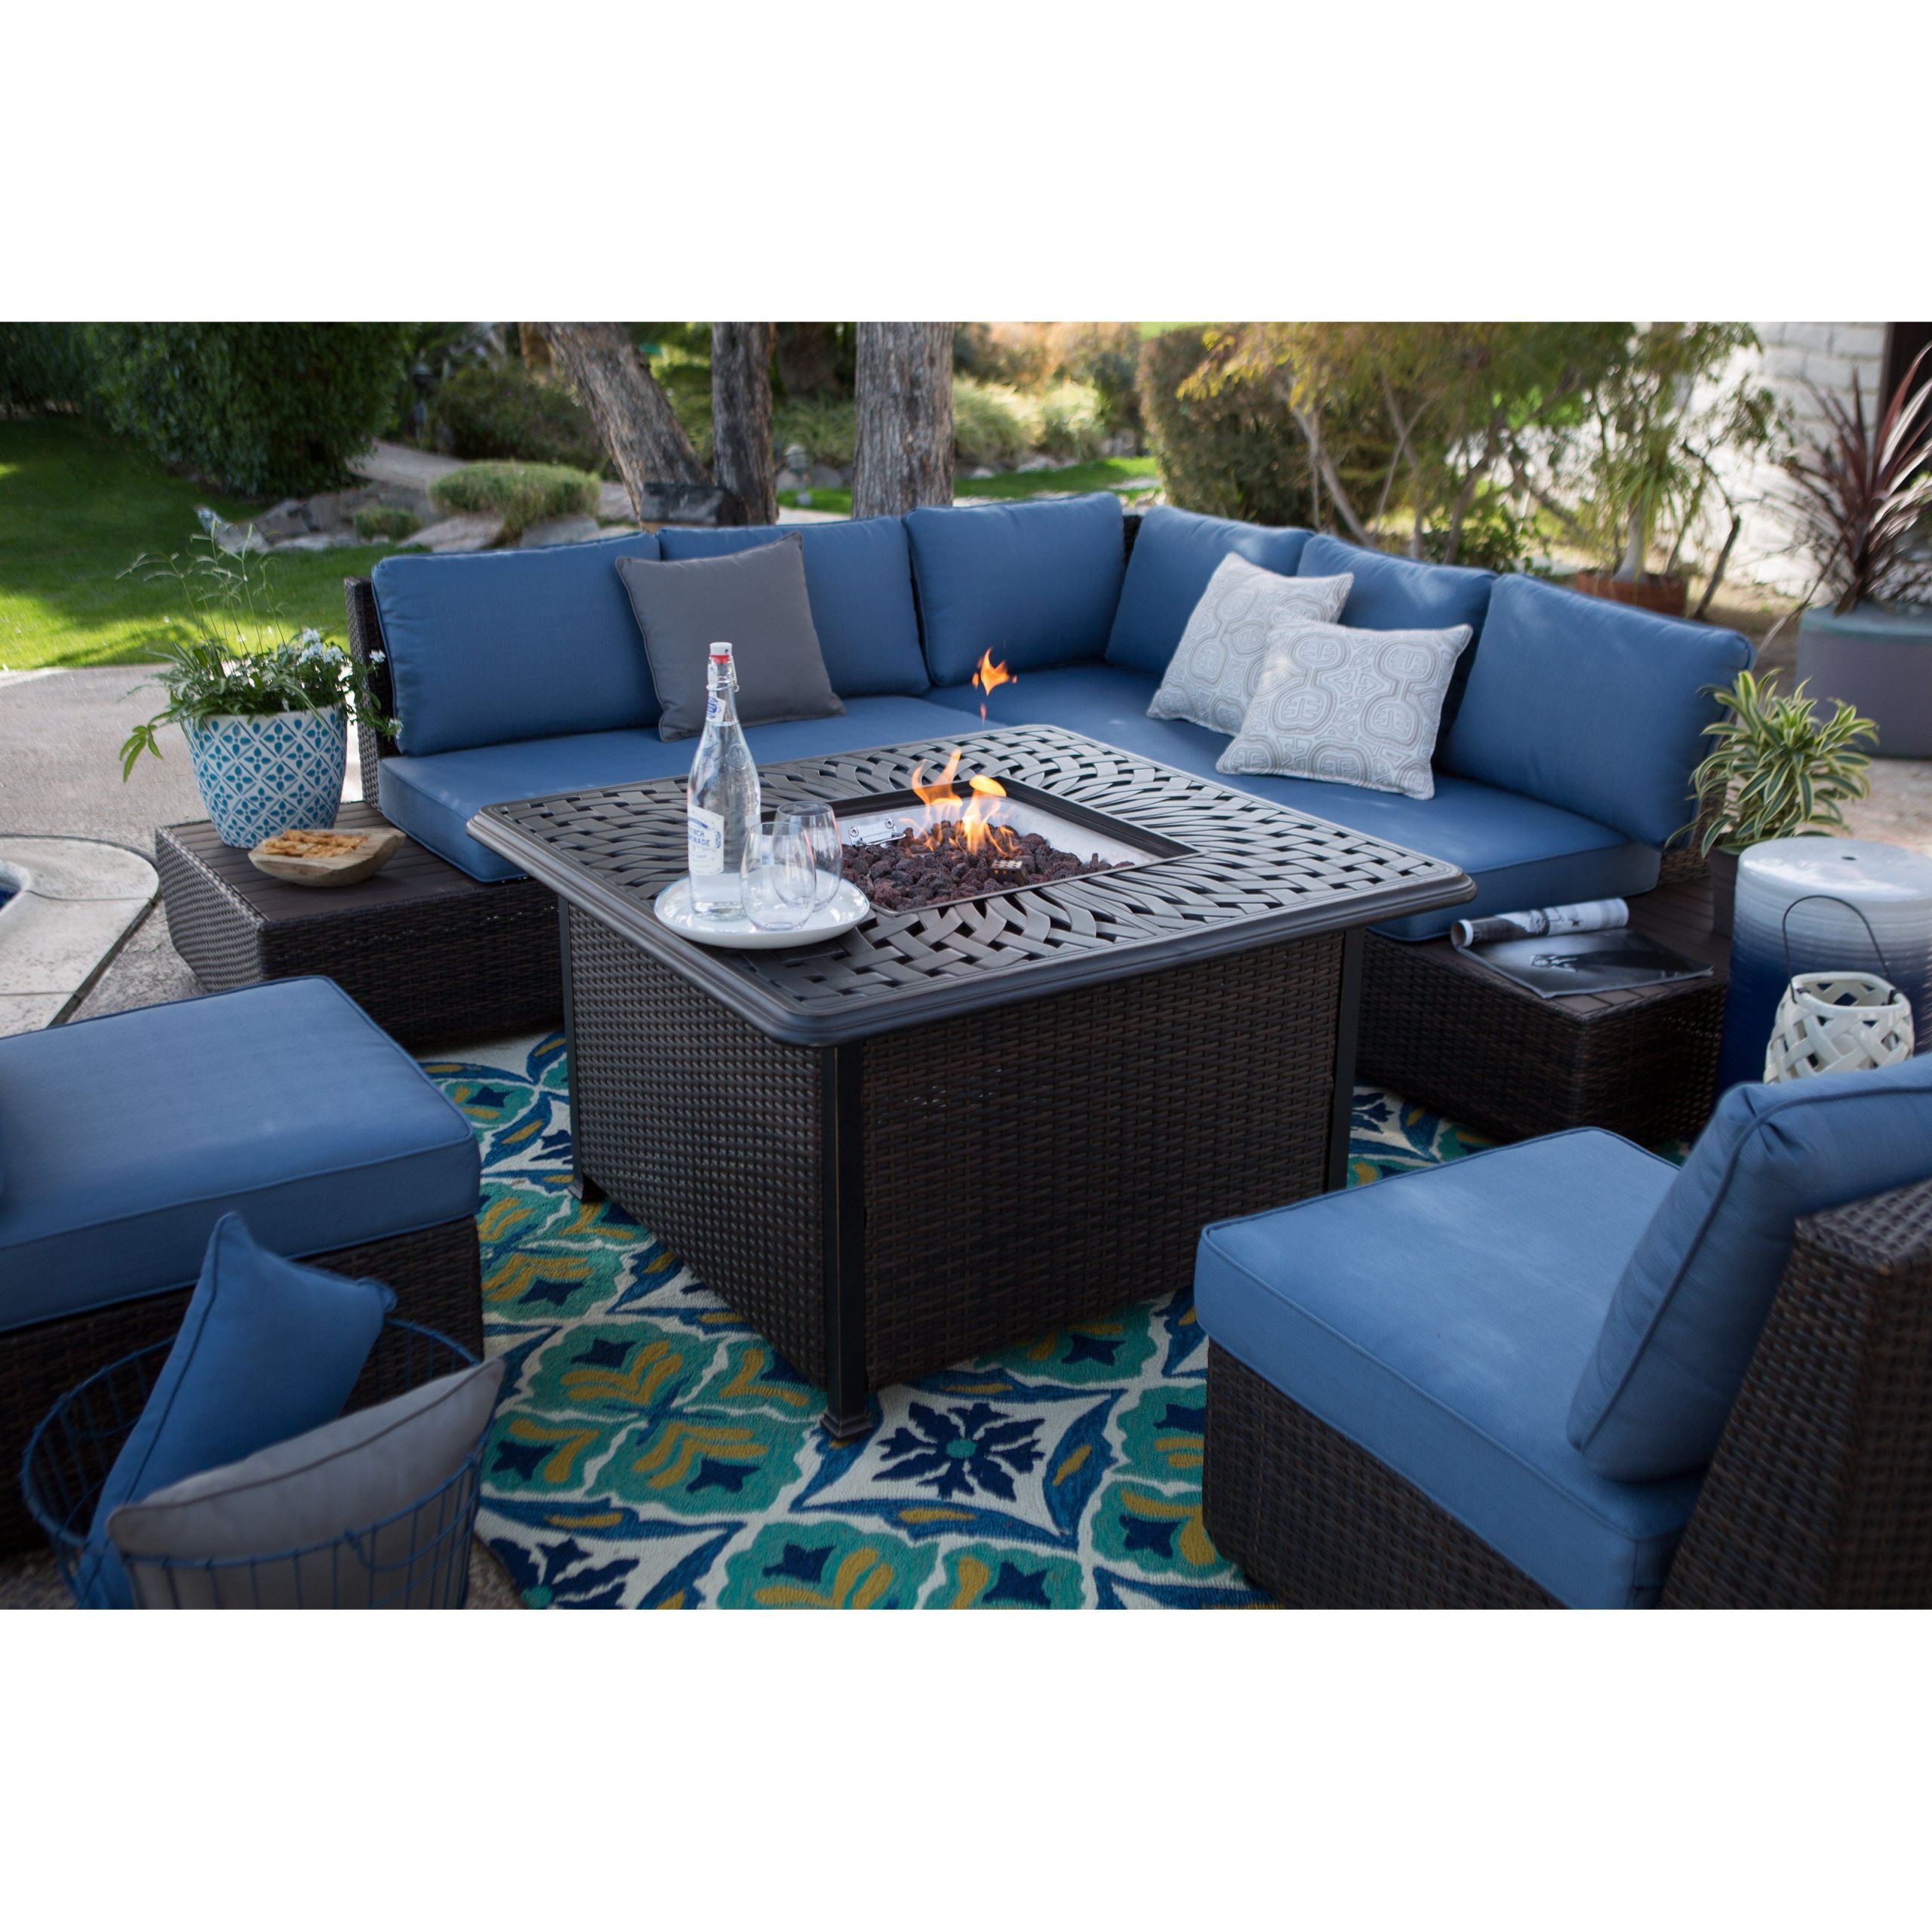 Patio Set With Fire Pit
 Belham Living Luciana Bay Wicker Sofa Sectional Set with